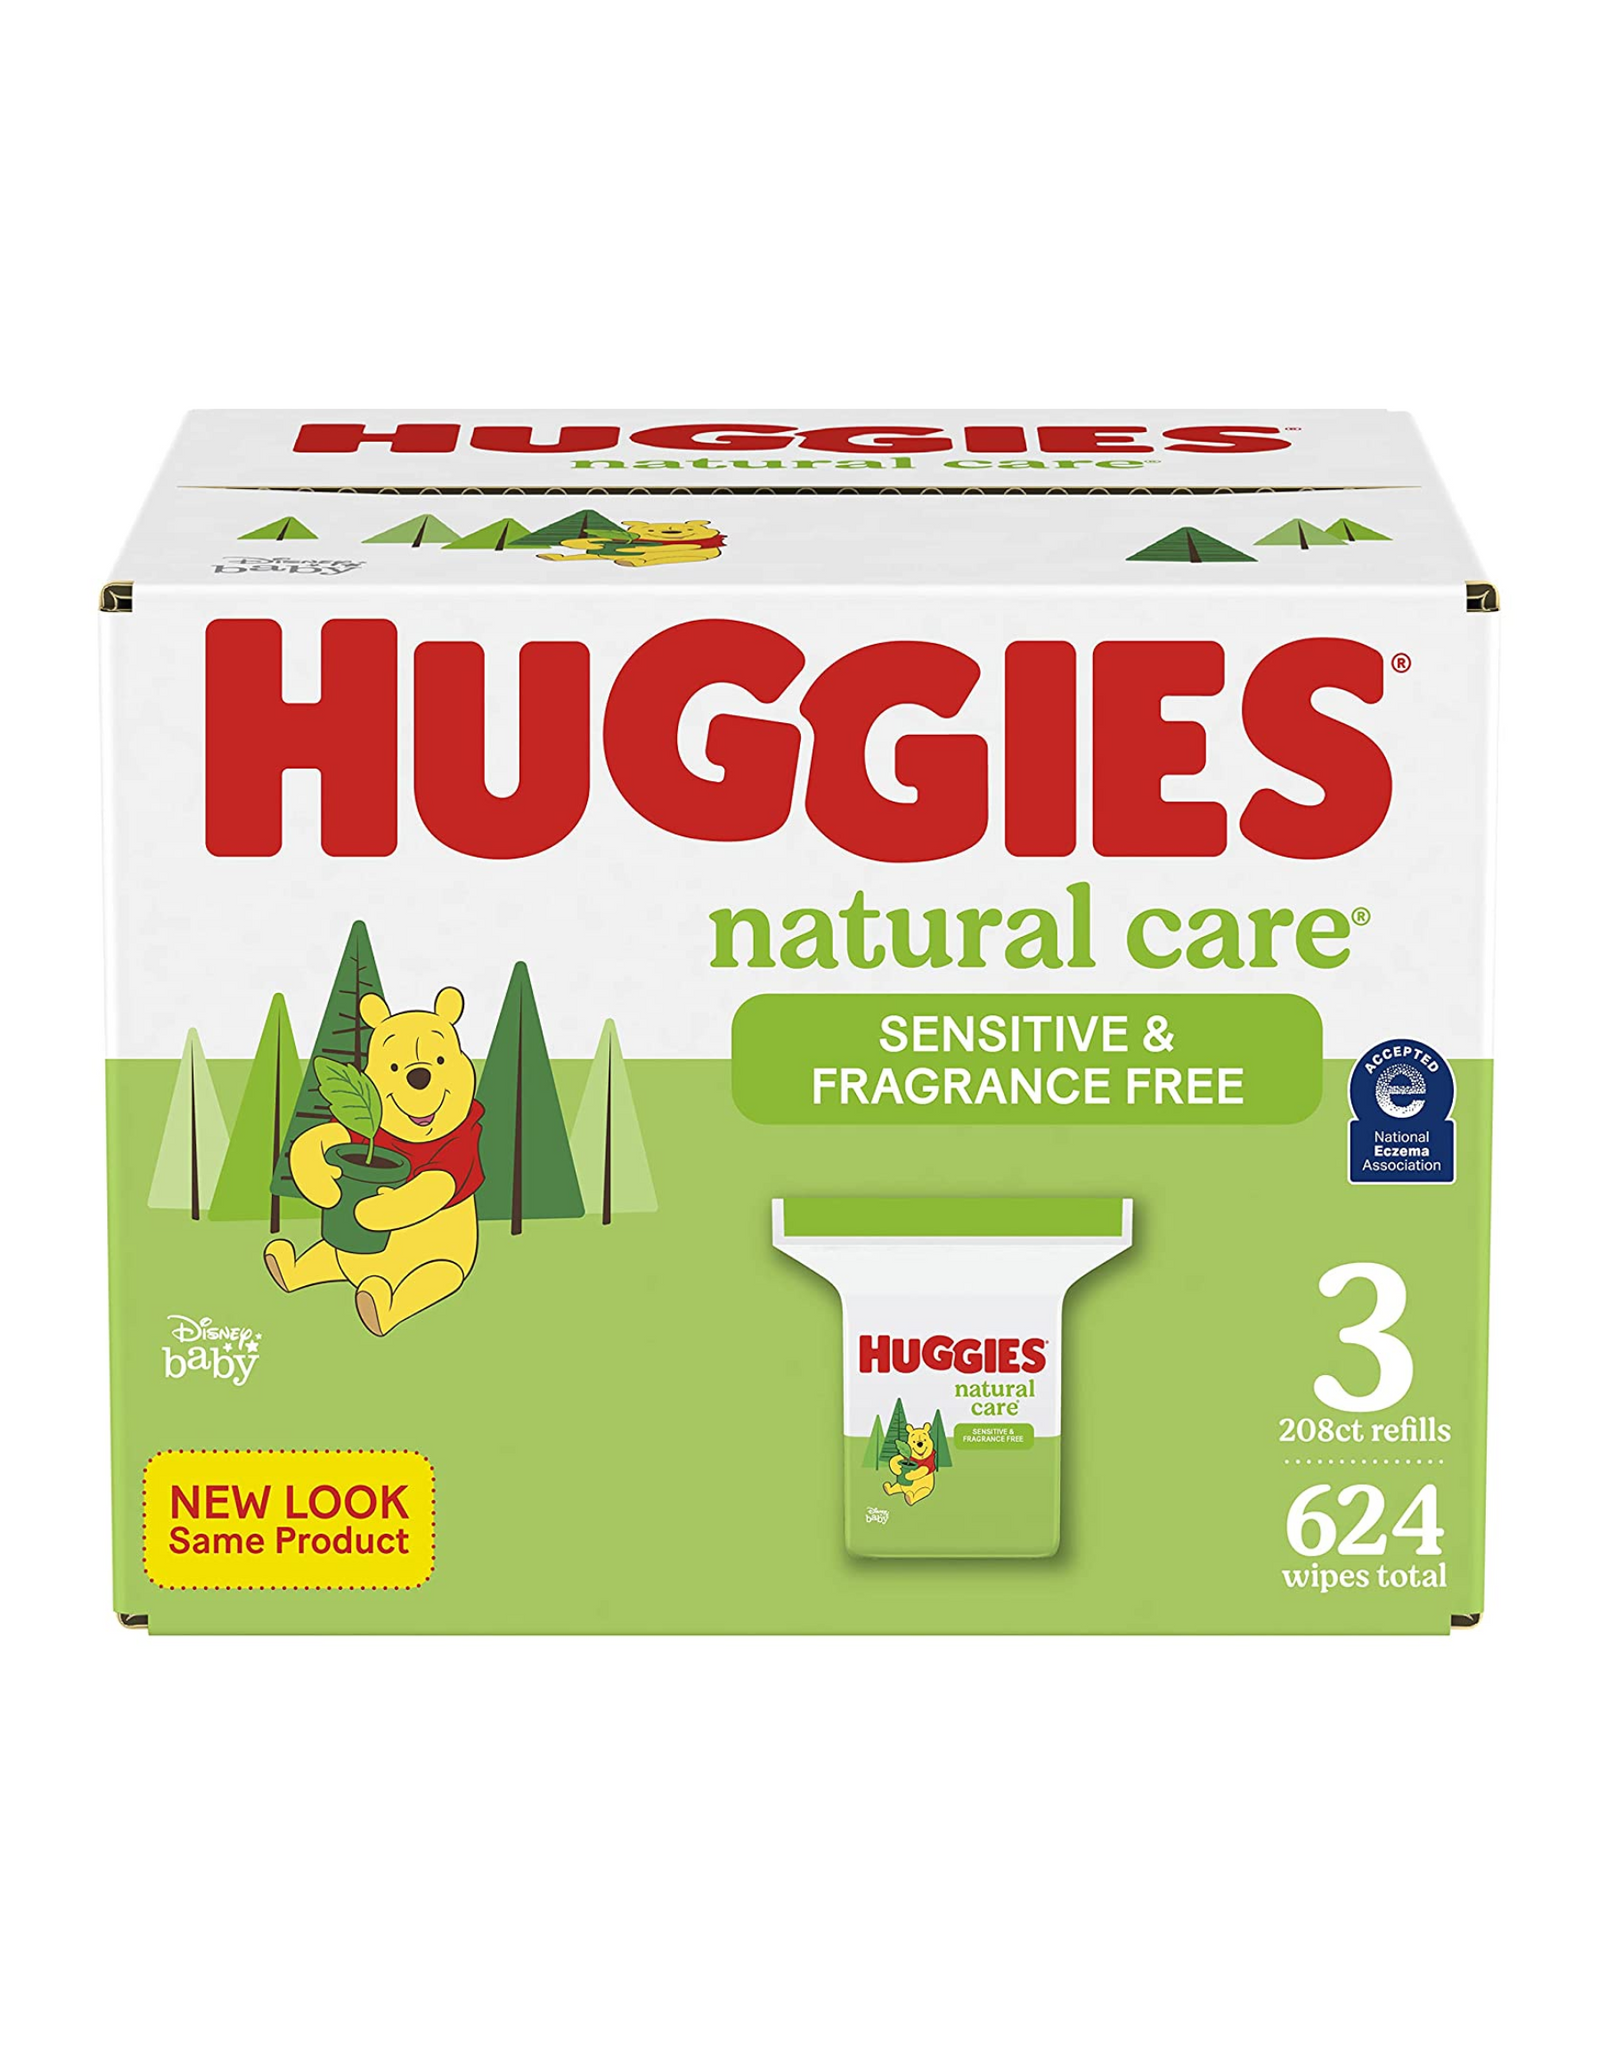 Baby Wipes, Huggies Natural Care Sensitive & Fragrance Free, 624 Wipes Total (3 Refill Packs)